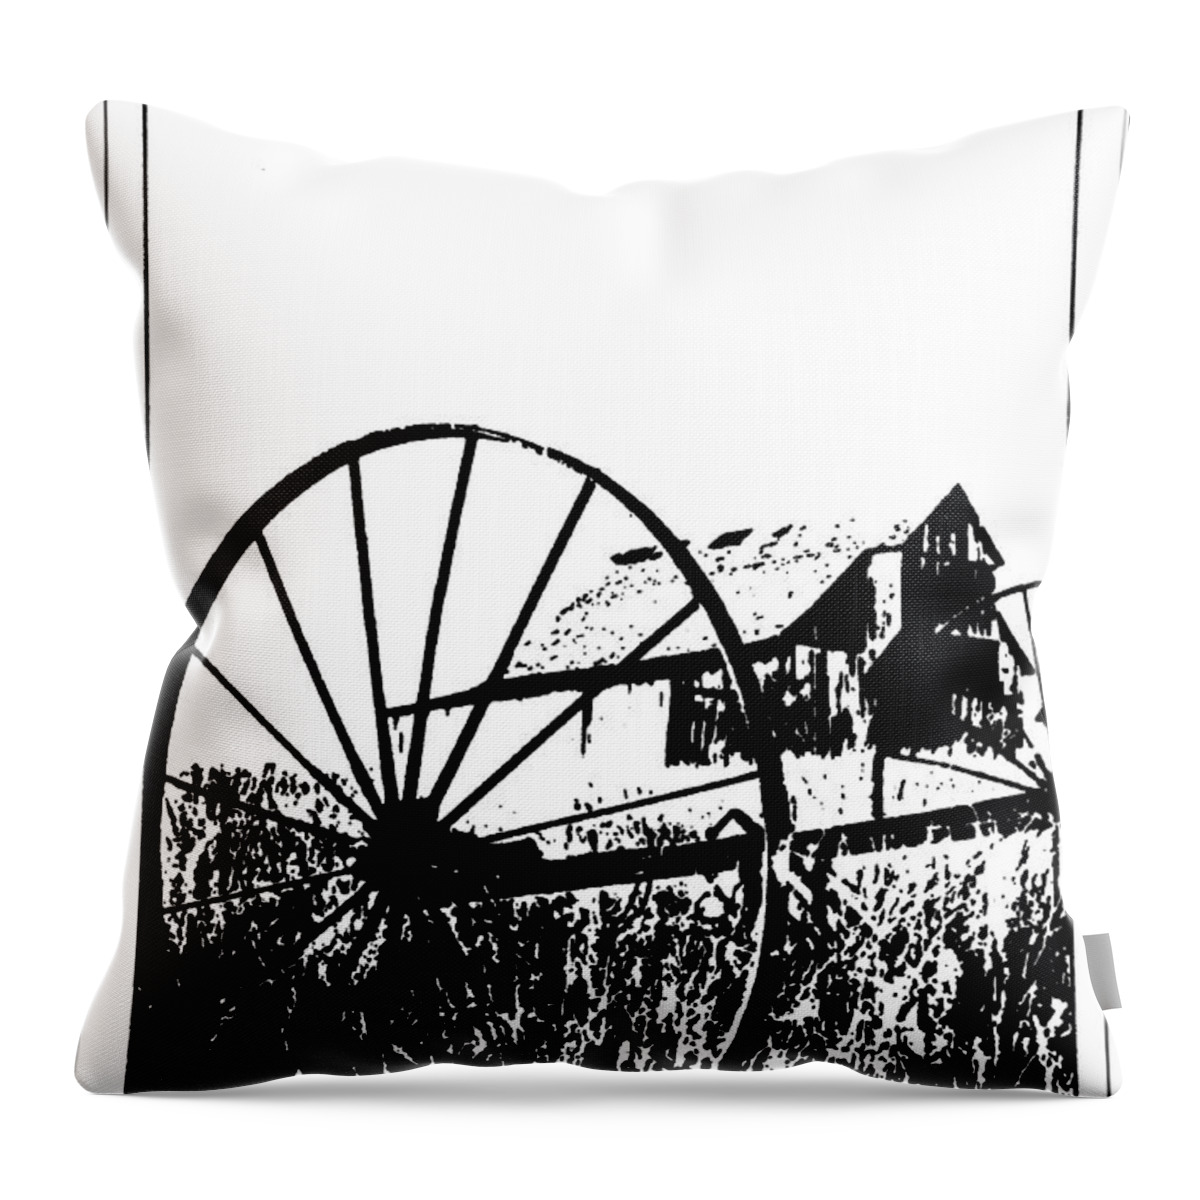 Photography Digital Art Abstract Black White Throw Pillow featuring the digital art Grandfather's Farm by Peggy Cooper-Hendon